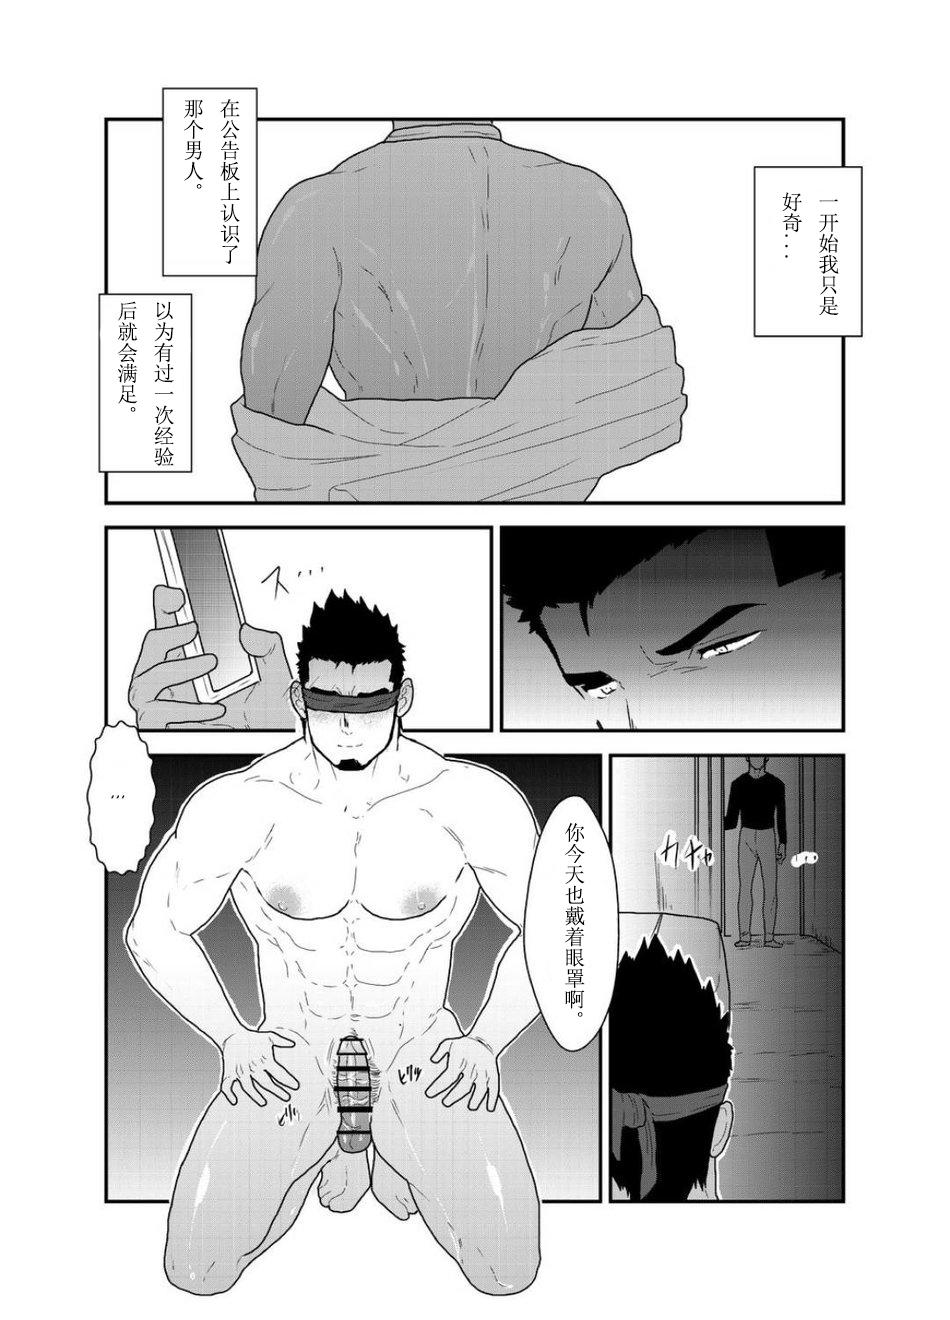 Indonesian Private | 私人性狂欢 - Original Gay Theresome - Page 6